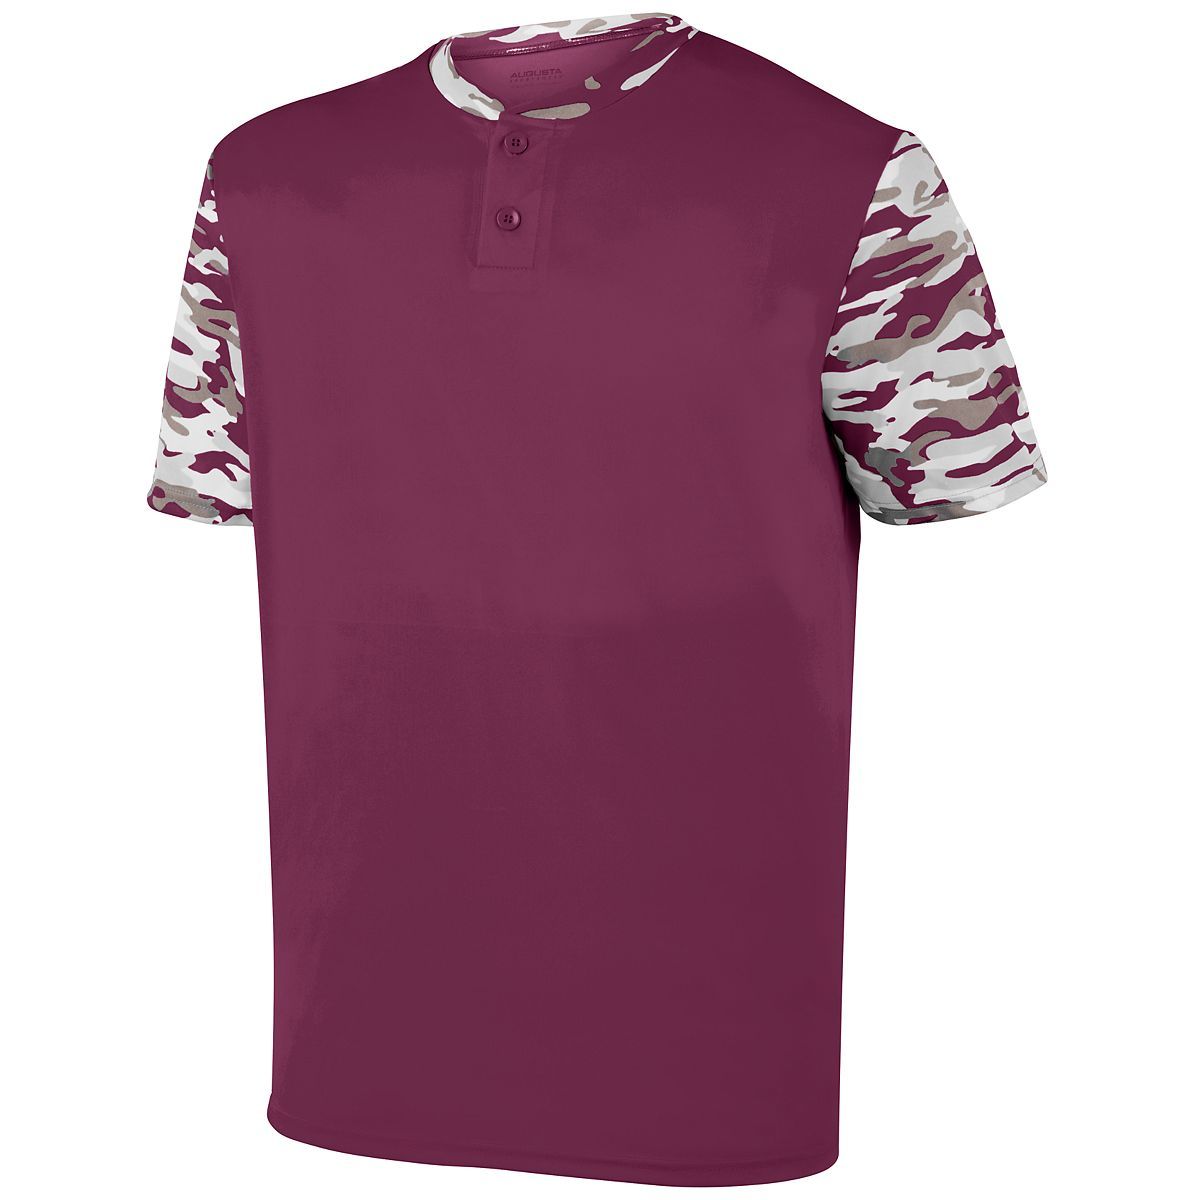 Augusta Sportswear Pop Fly Jersey in Maroon/Maroon Mod  -Part of the Adult, Adult-Jersey, Augusta-Products, Baseball, Shirts, All-Sports, All-Sports-1 product lines at KanaleyCreations.com